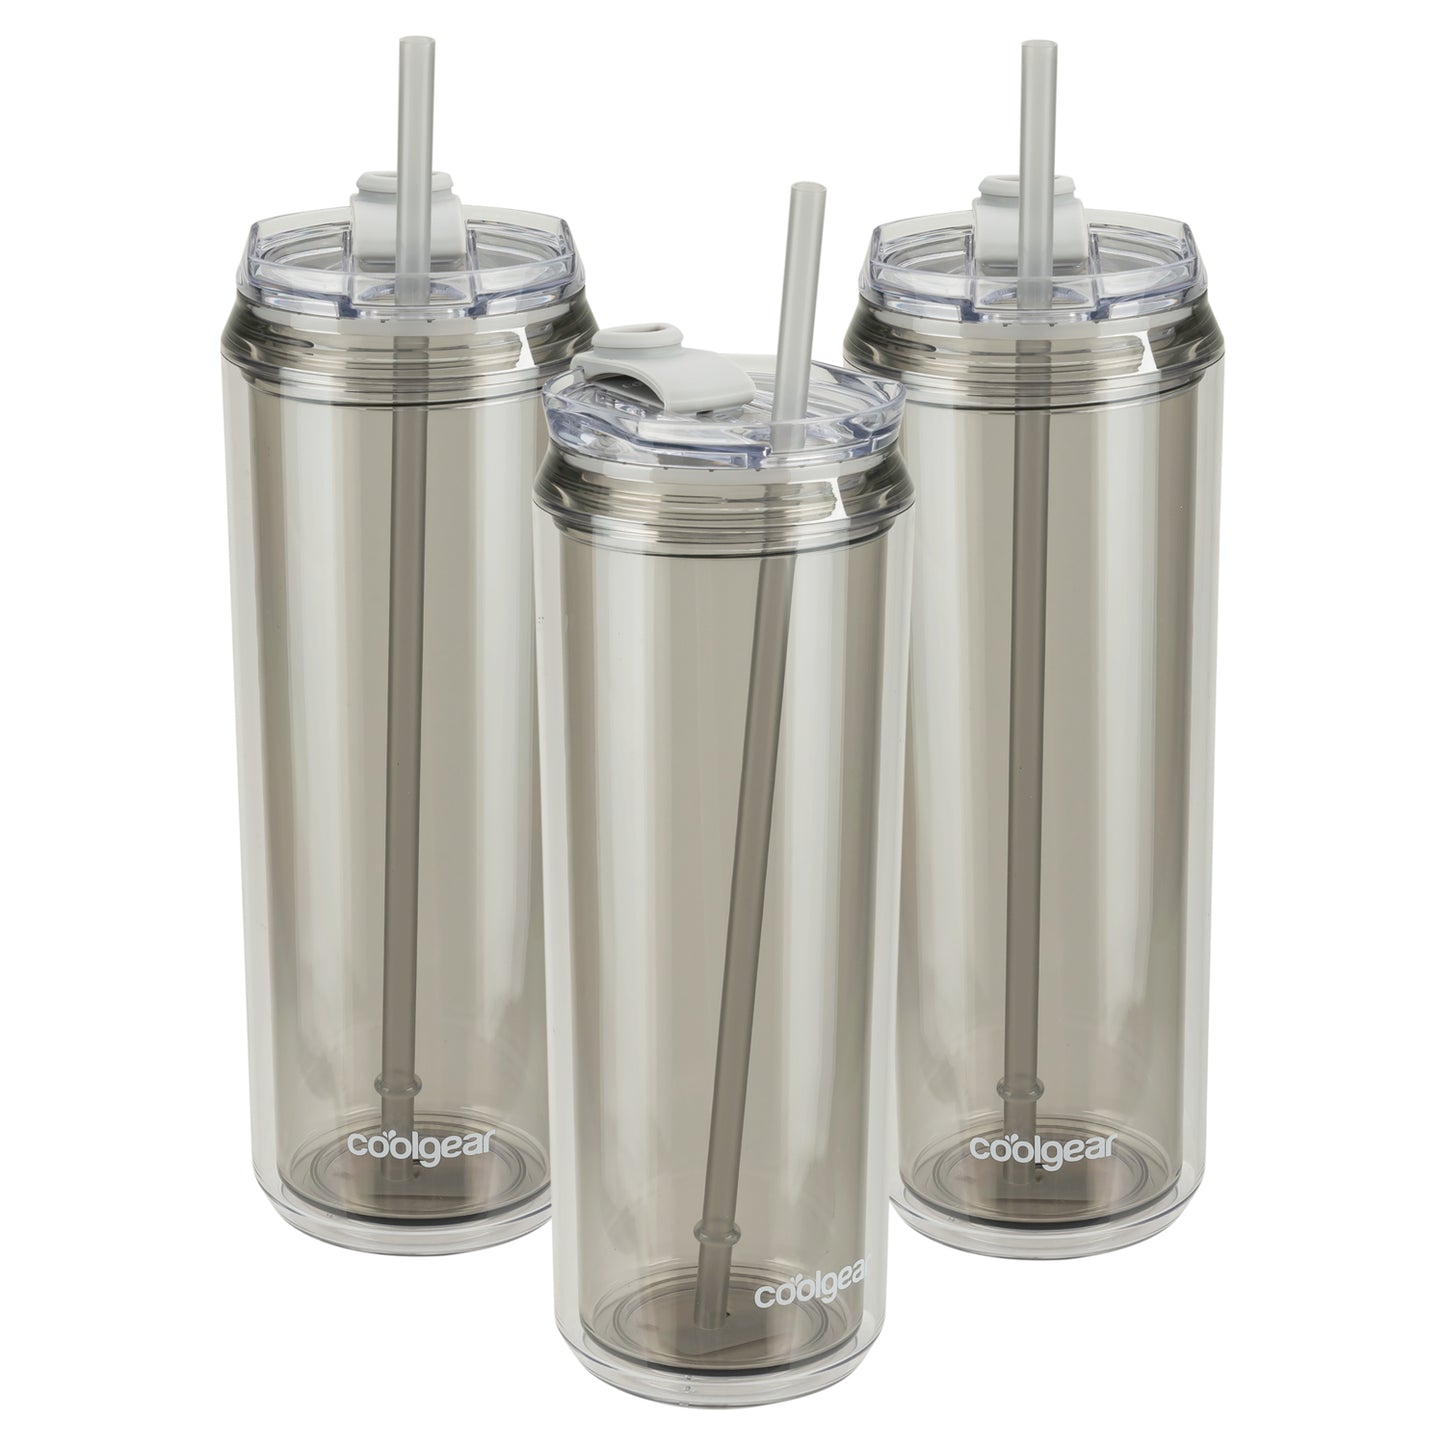 Cool Gear 3-Pack 22 oz Modern Tumbler with Reusable Straw | Dishwasher Safe, Cup Holder Friendly, Spillproof, Double-Wall Insulated Travel Tumbler | Solid Cool Grey Pack